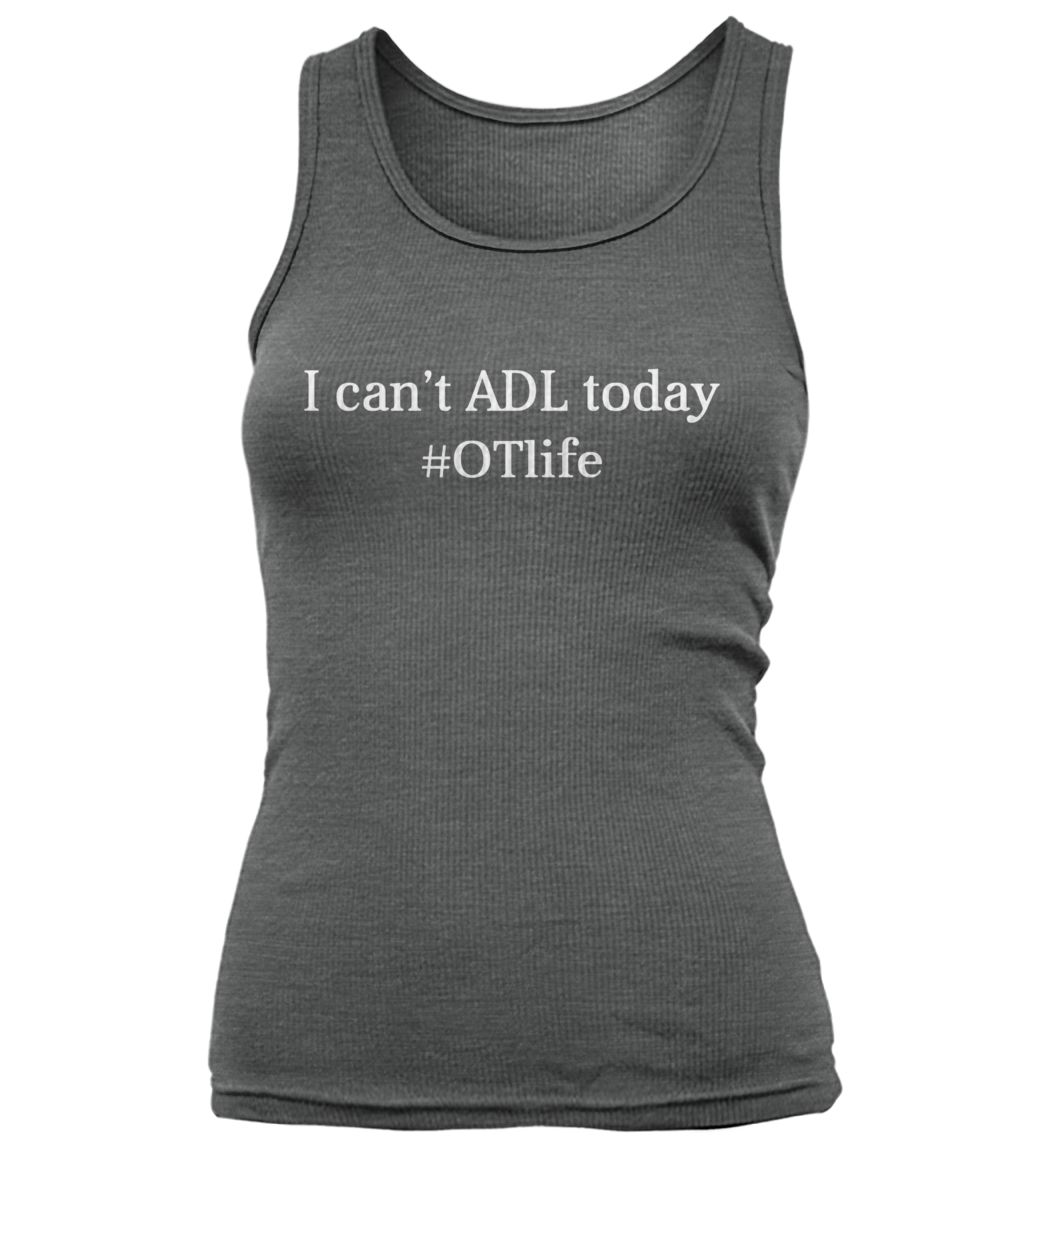 I can't ADL today #OTLife women's tank top